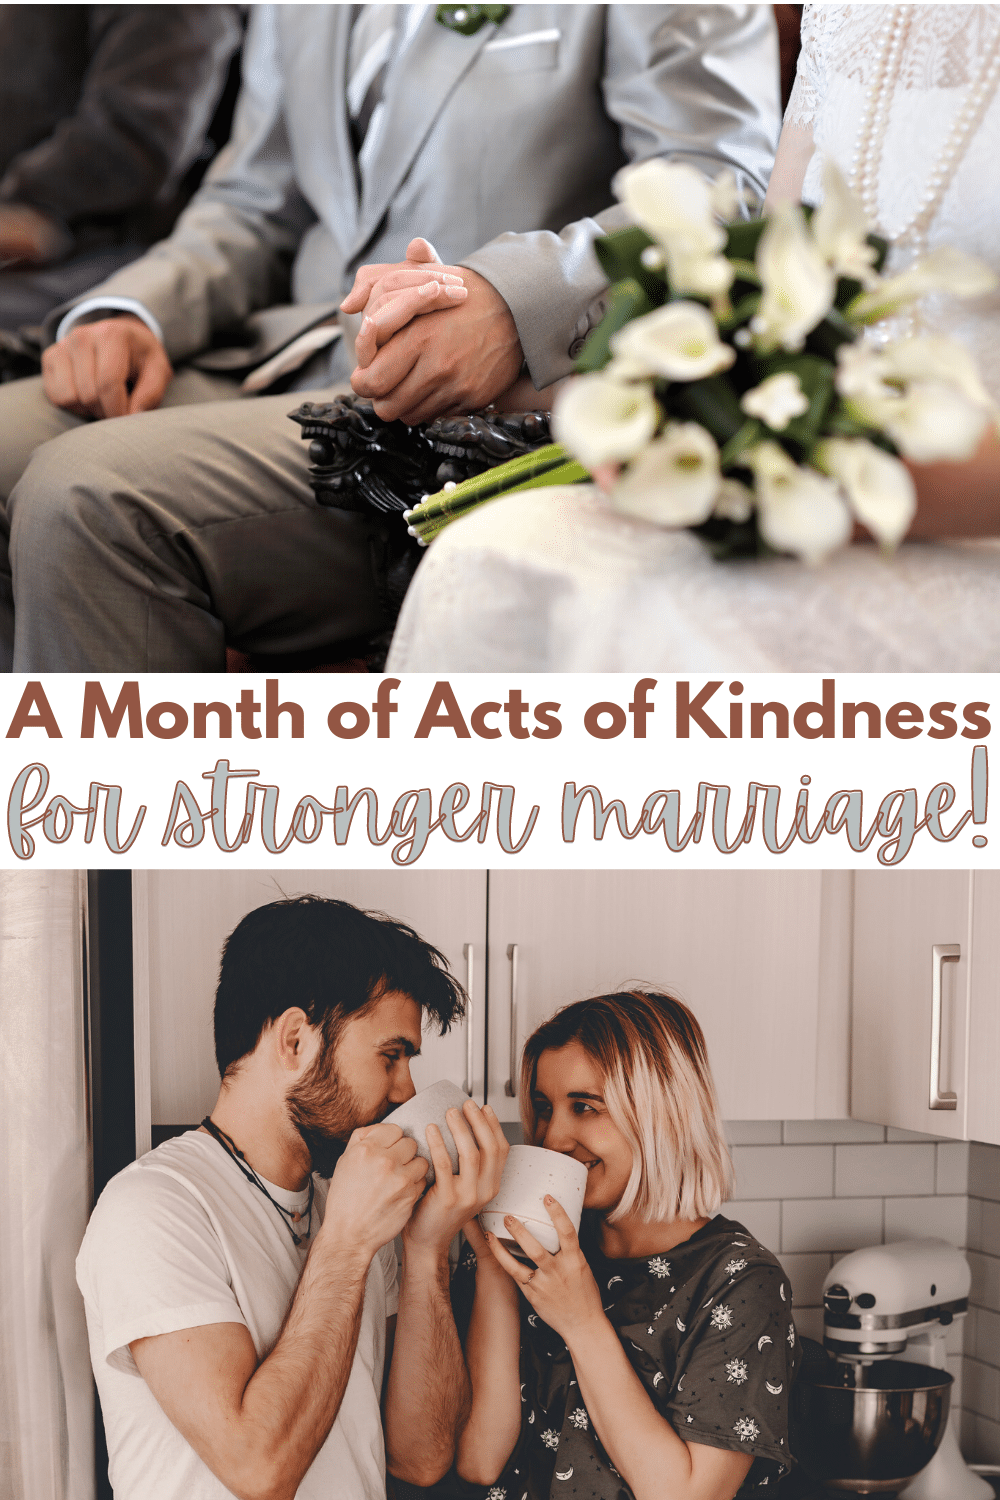 Acts of kindness don't have to be random or only for strangers. This calendar is full of acts you can do for your spouse to create a stronger marriage. #actsofkindness #marriagetips #marriageadvice via @wondermomwannab